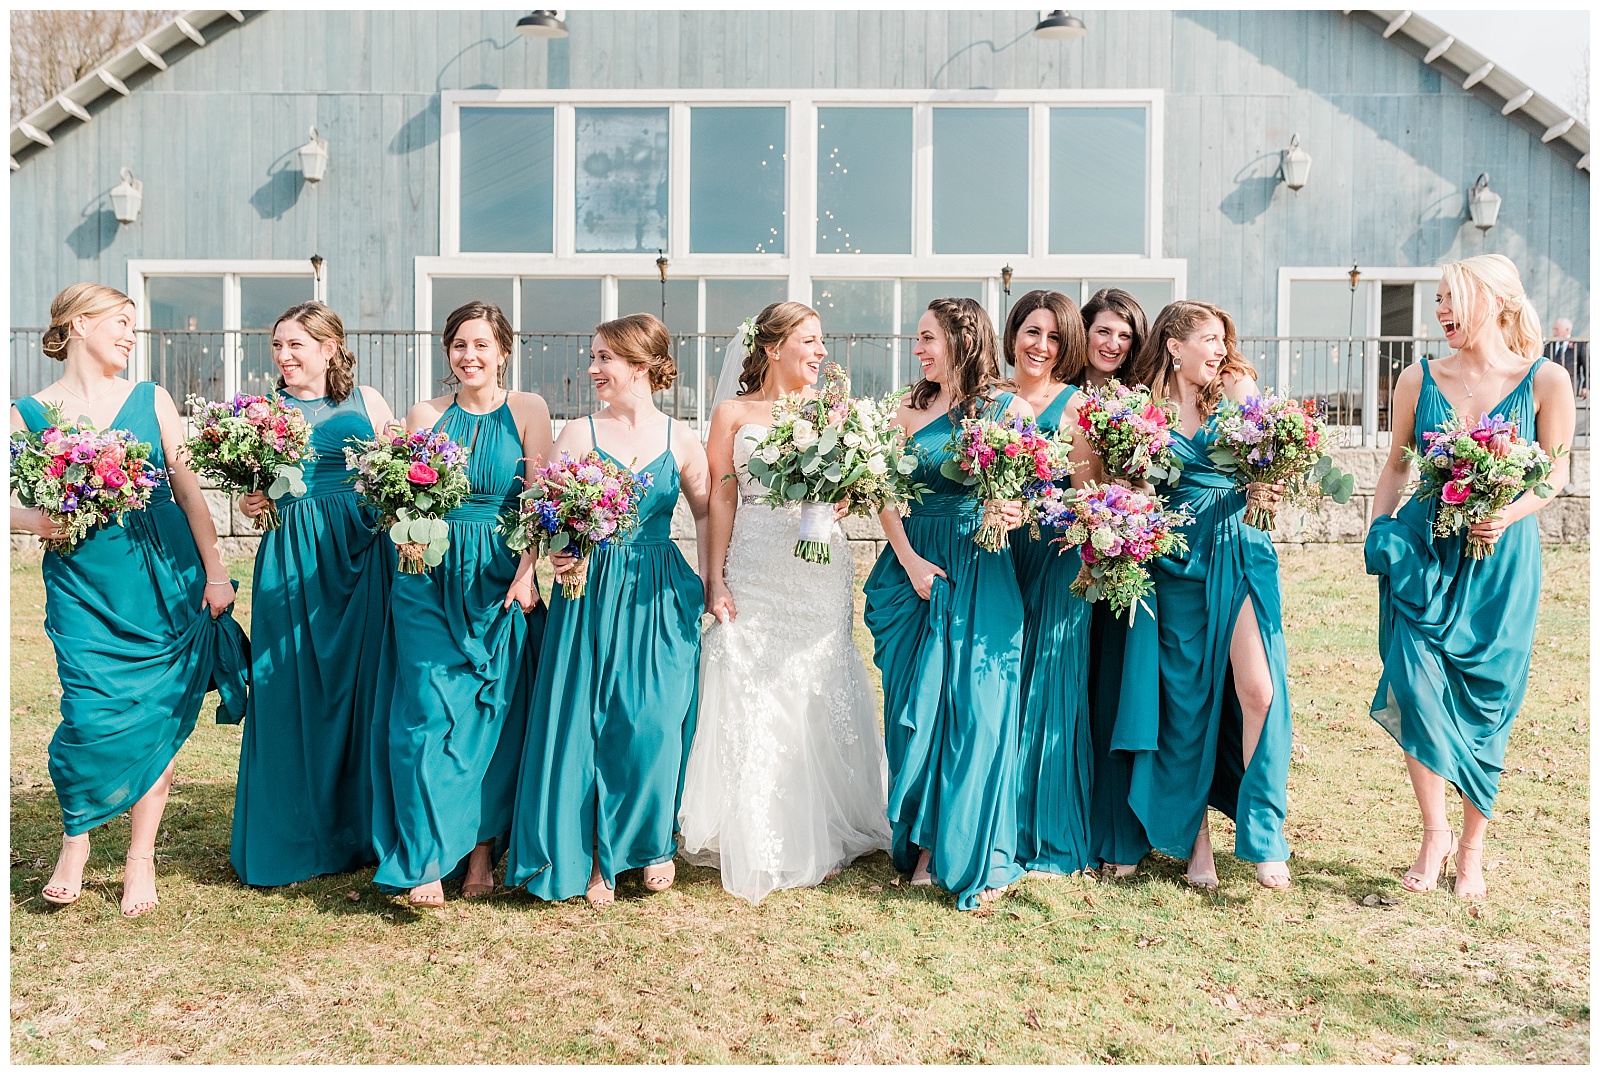 Bridesmaids wearing teal dresses holding colorful bouquets, walking and laughing next to the bride.